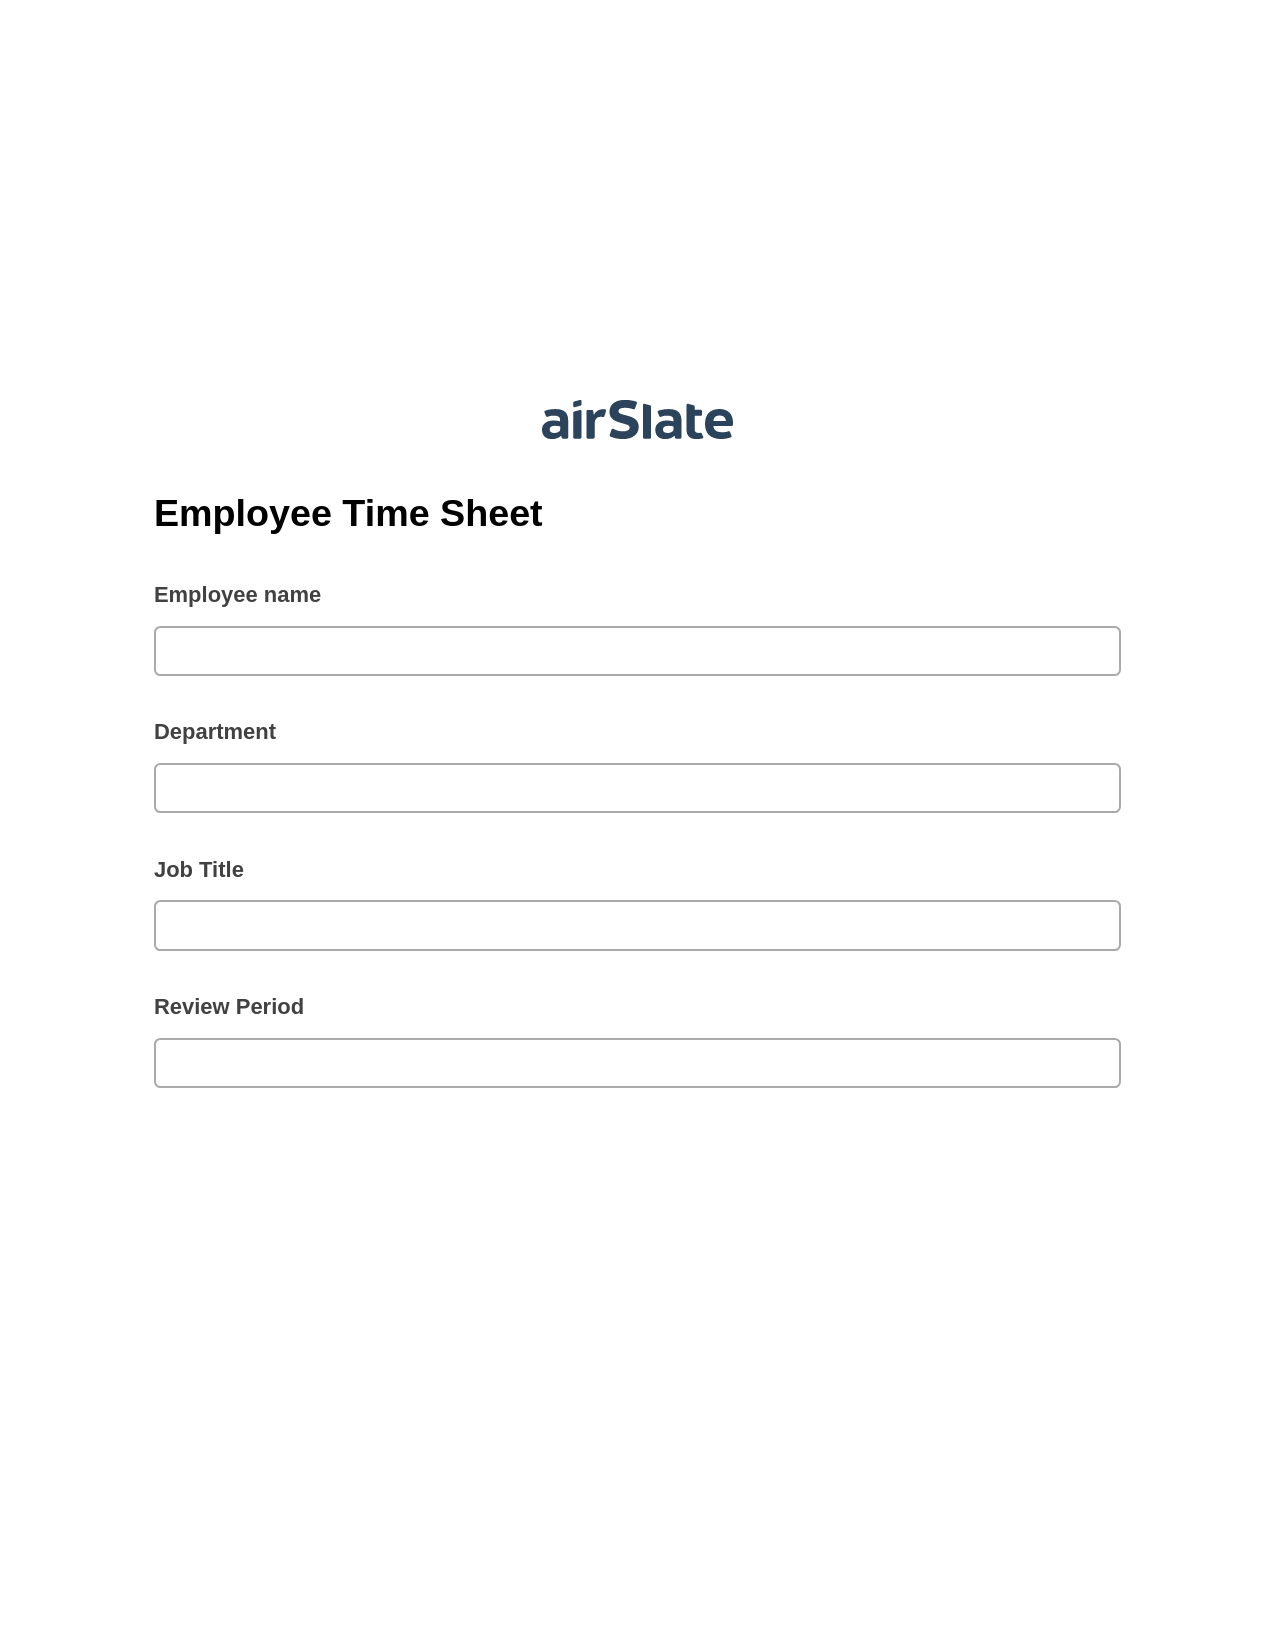 Multirole Employee Time Sheet Pre-fill from MS Dynamics 365 Records, Create Salesforce Records Bot, Slack Two-Way Binding Bot